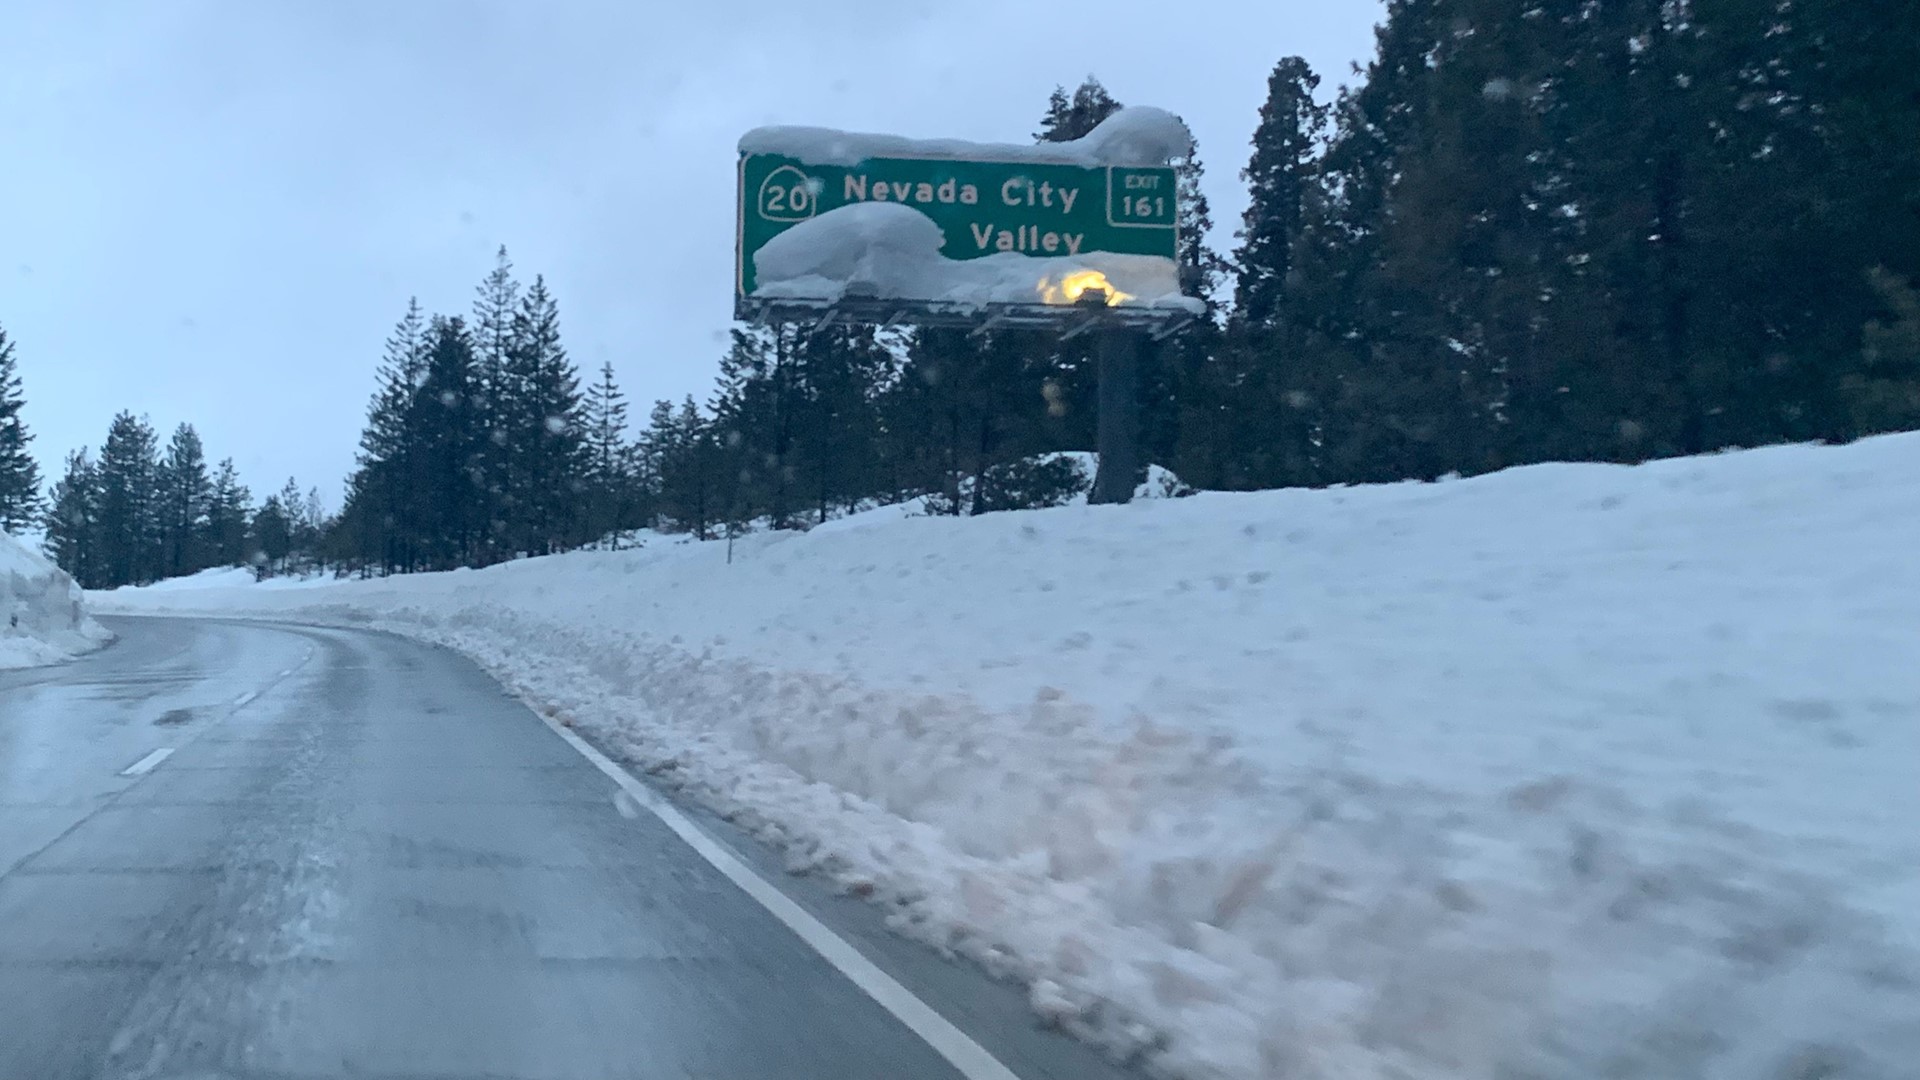 CHP officers from the Gold Run division let ABC10 ridealong with them for the day, to show just what they're dealing with on snow-covered I-80.